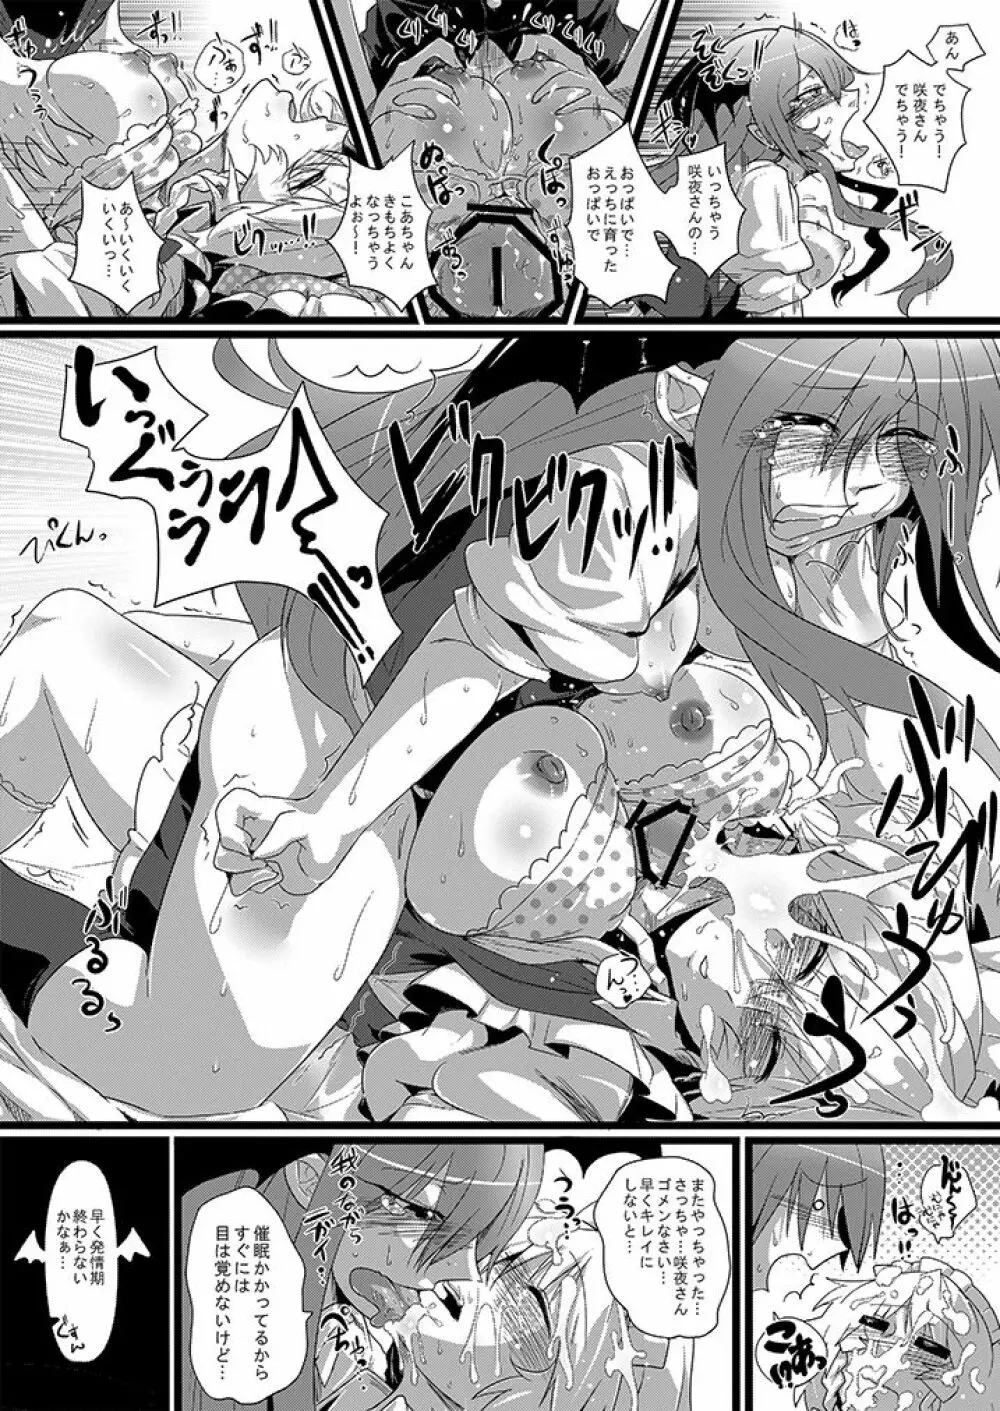 SAKUYA MAID in HEAVEN/ALL IN 1 - page6